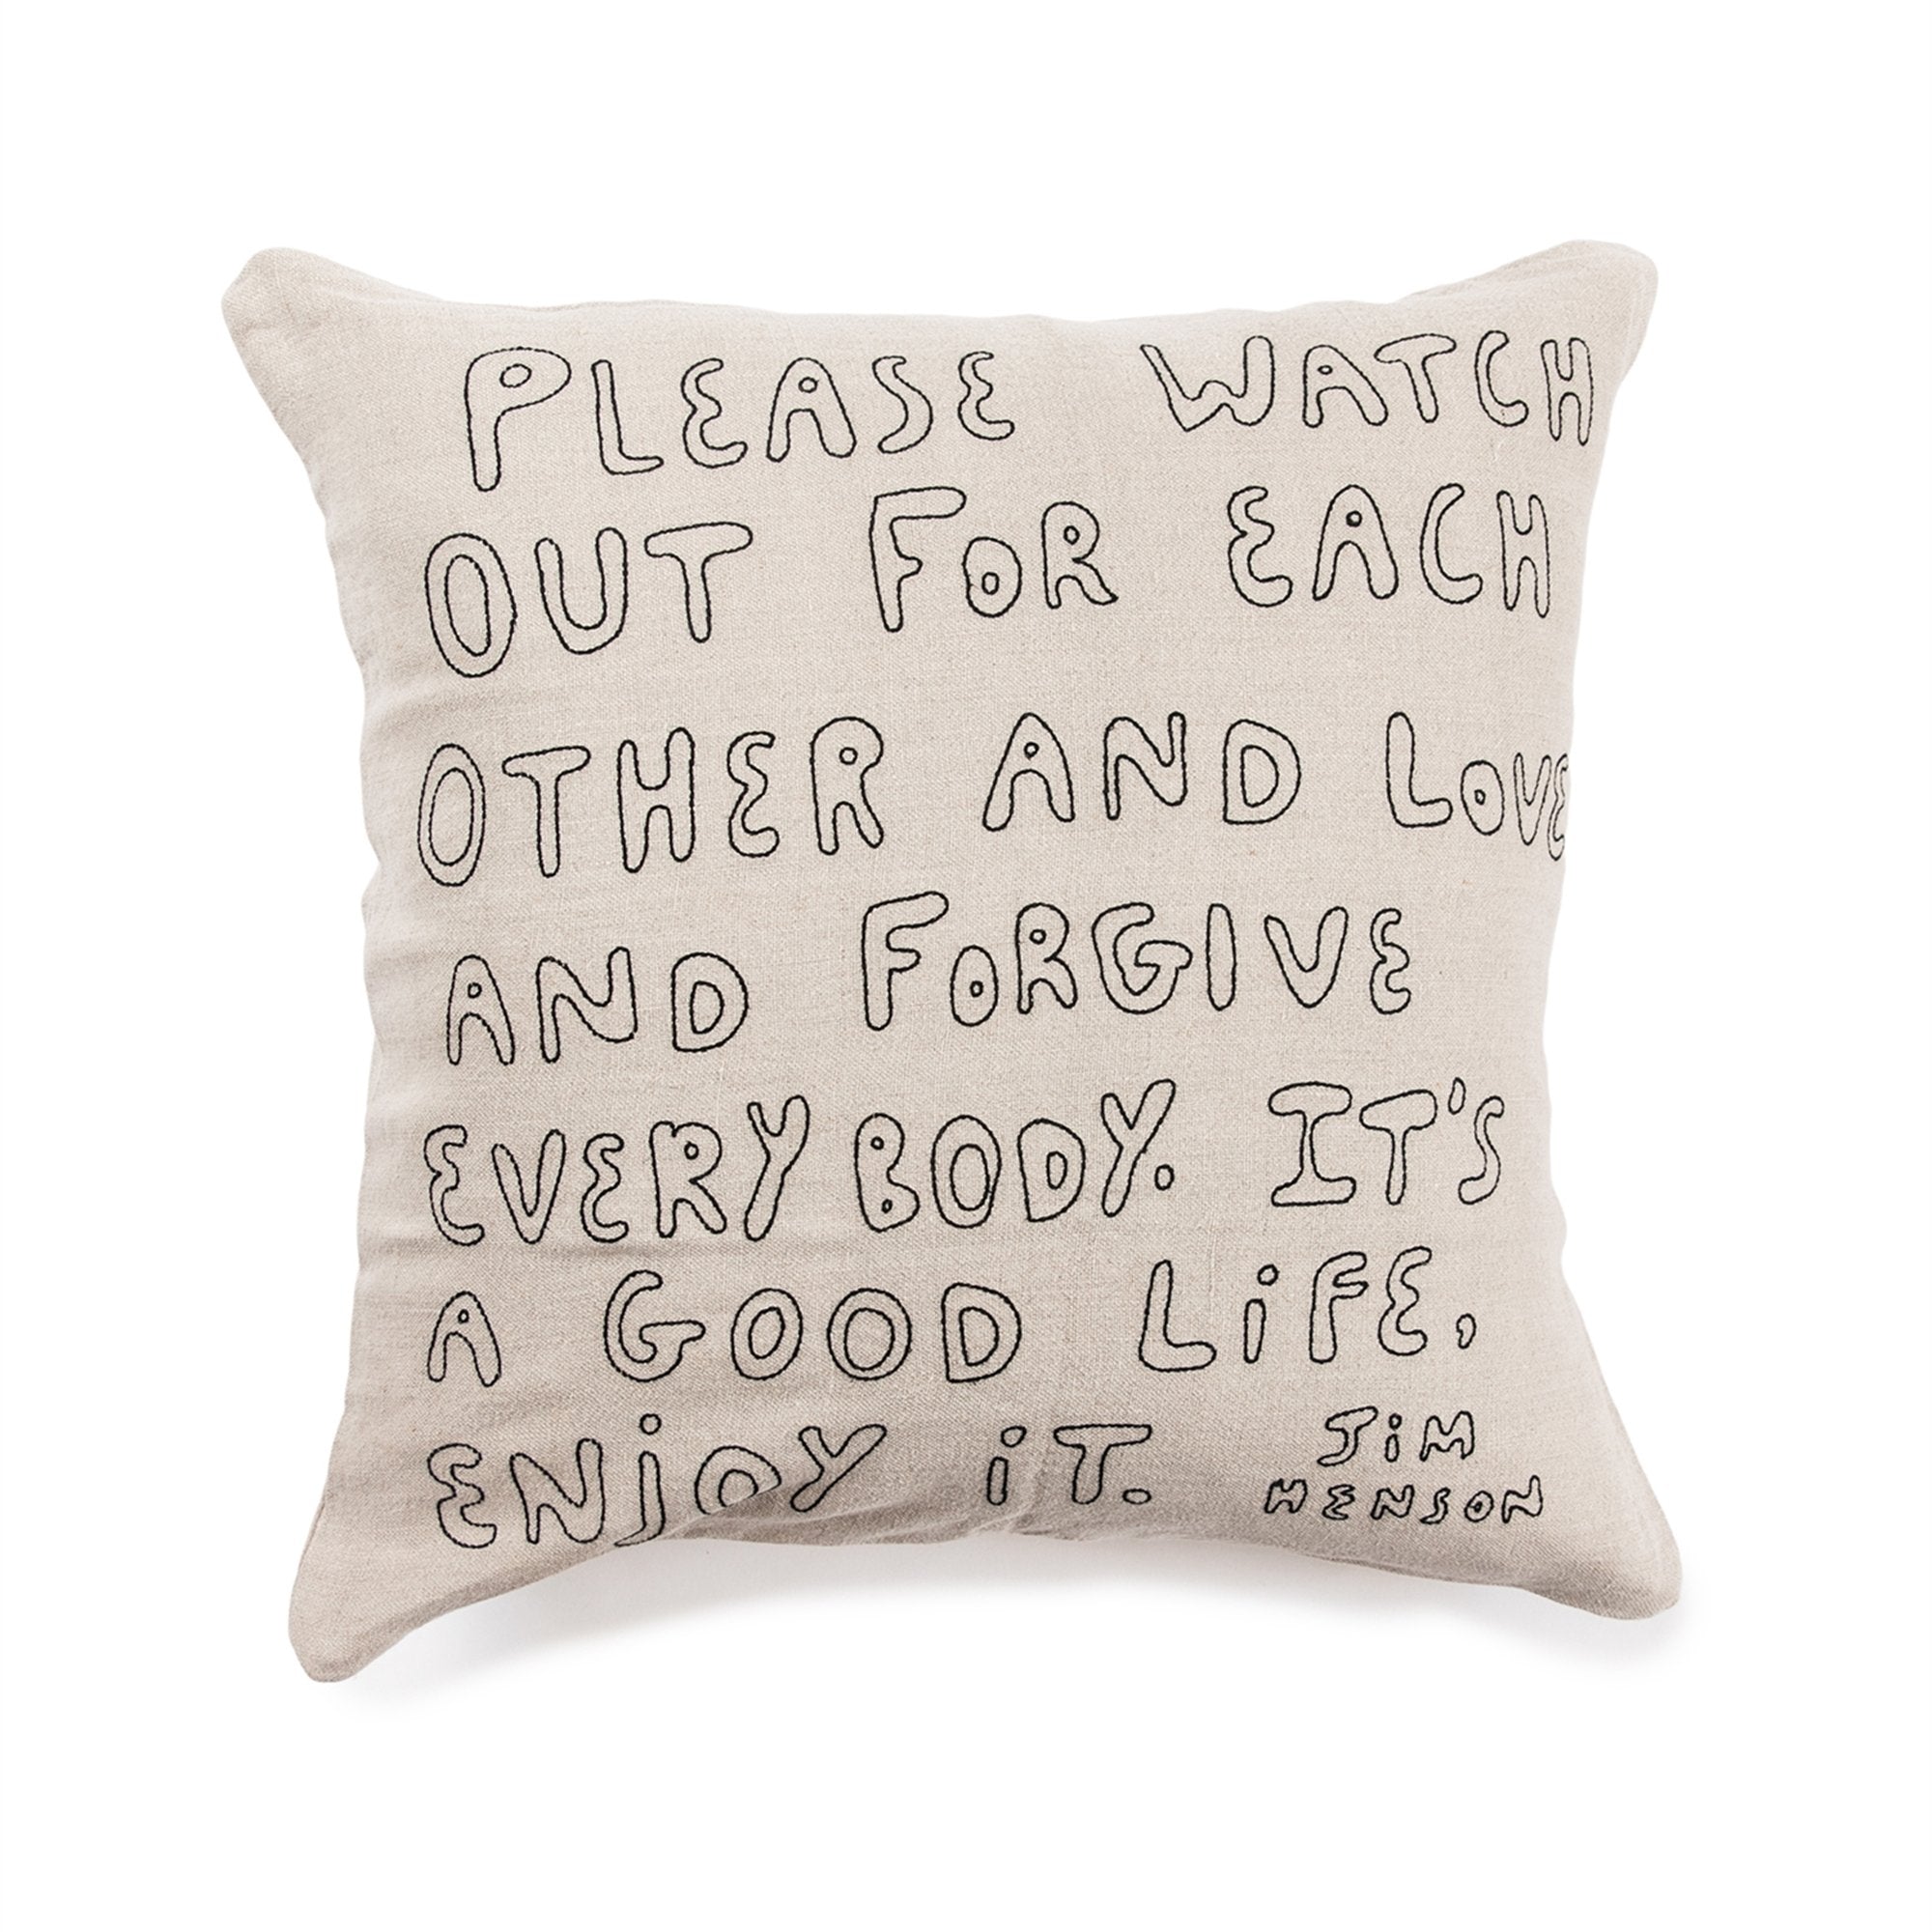 JIM HENSON EMBROIDERY PILLOW-Pillow-Jack and Jill Boutique